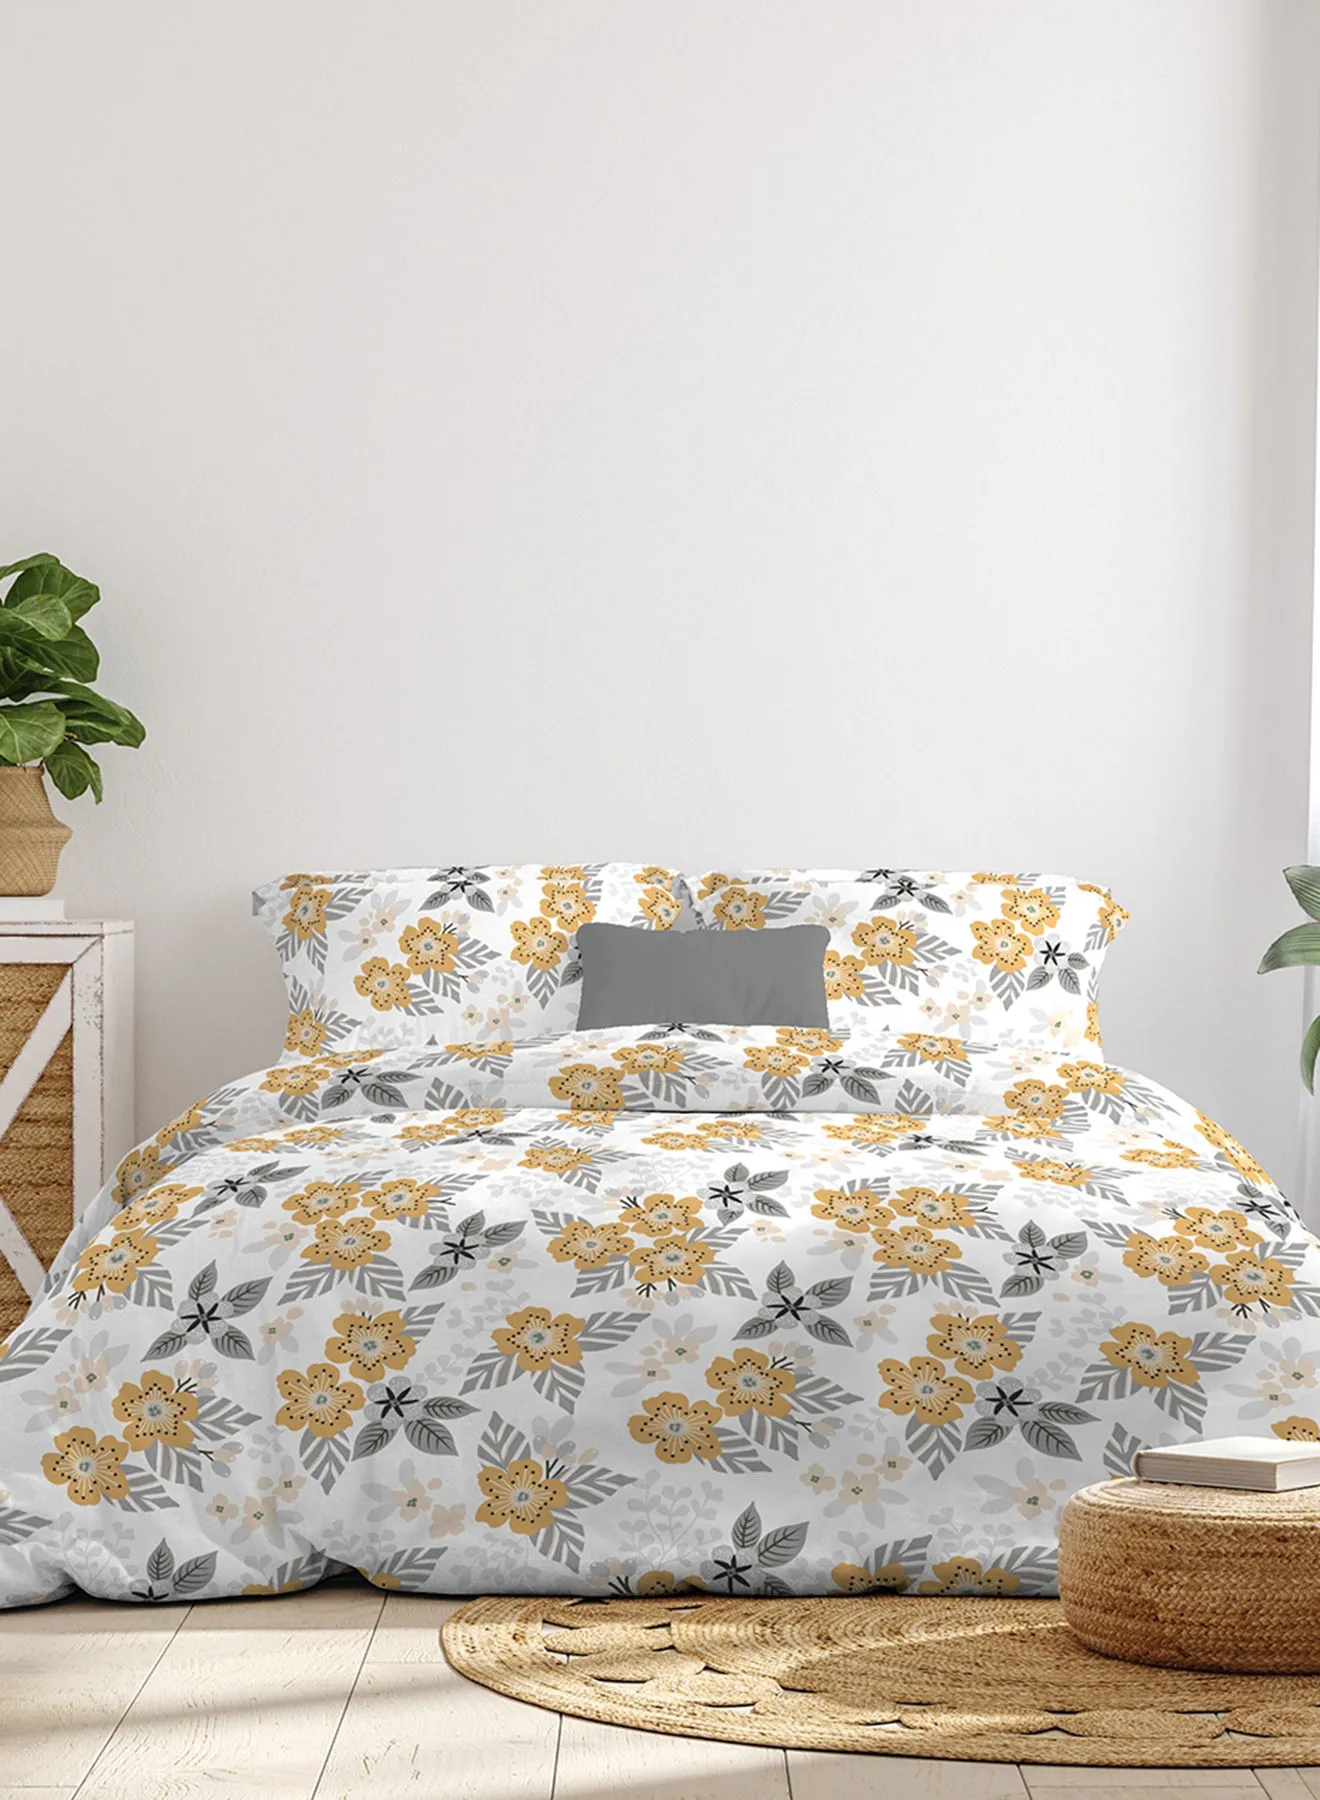 Amal Comforter Set Queen Size All Season Everyday Use Bedding Set 100% Cotton 3 Pieces 1 Comforter 2 Pillow Covers  White/Gold/Grey